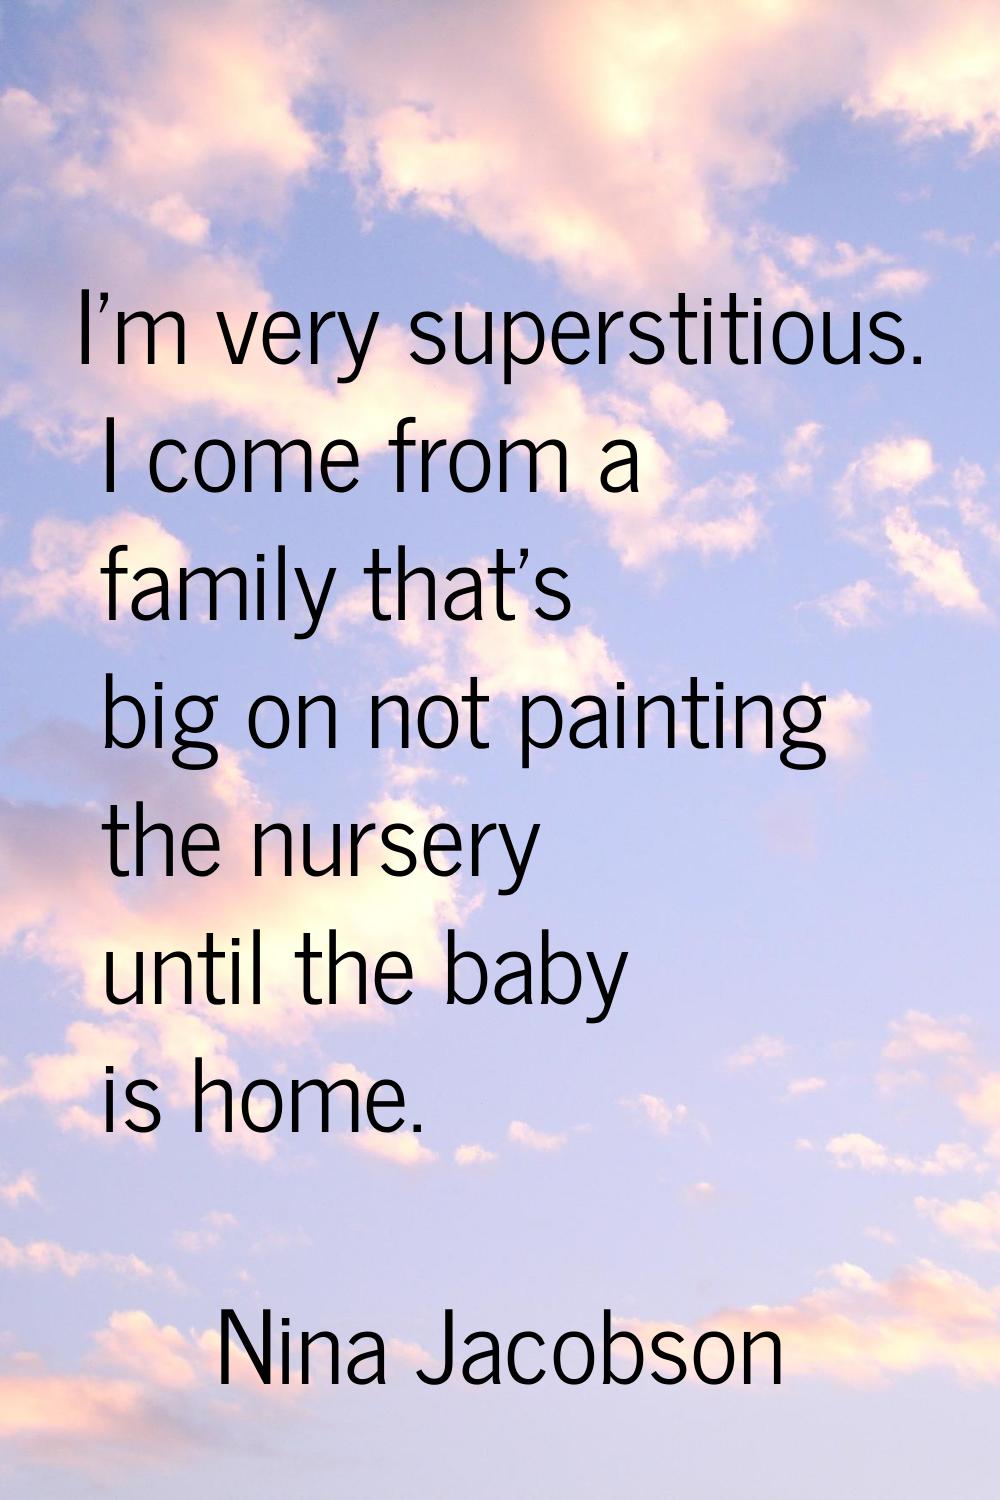 I'm very superstitious. I come from a family that's big on not painting the nursery until the baby 